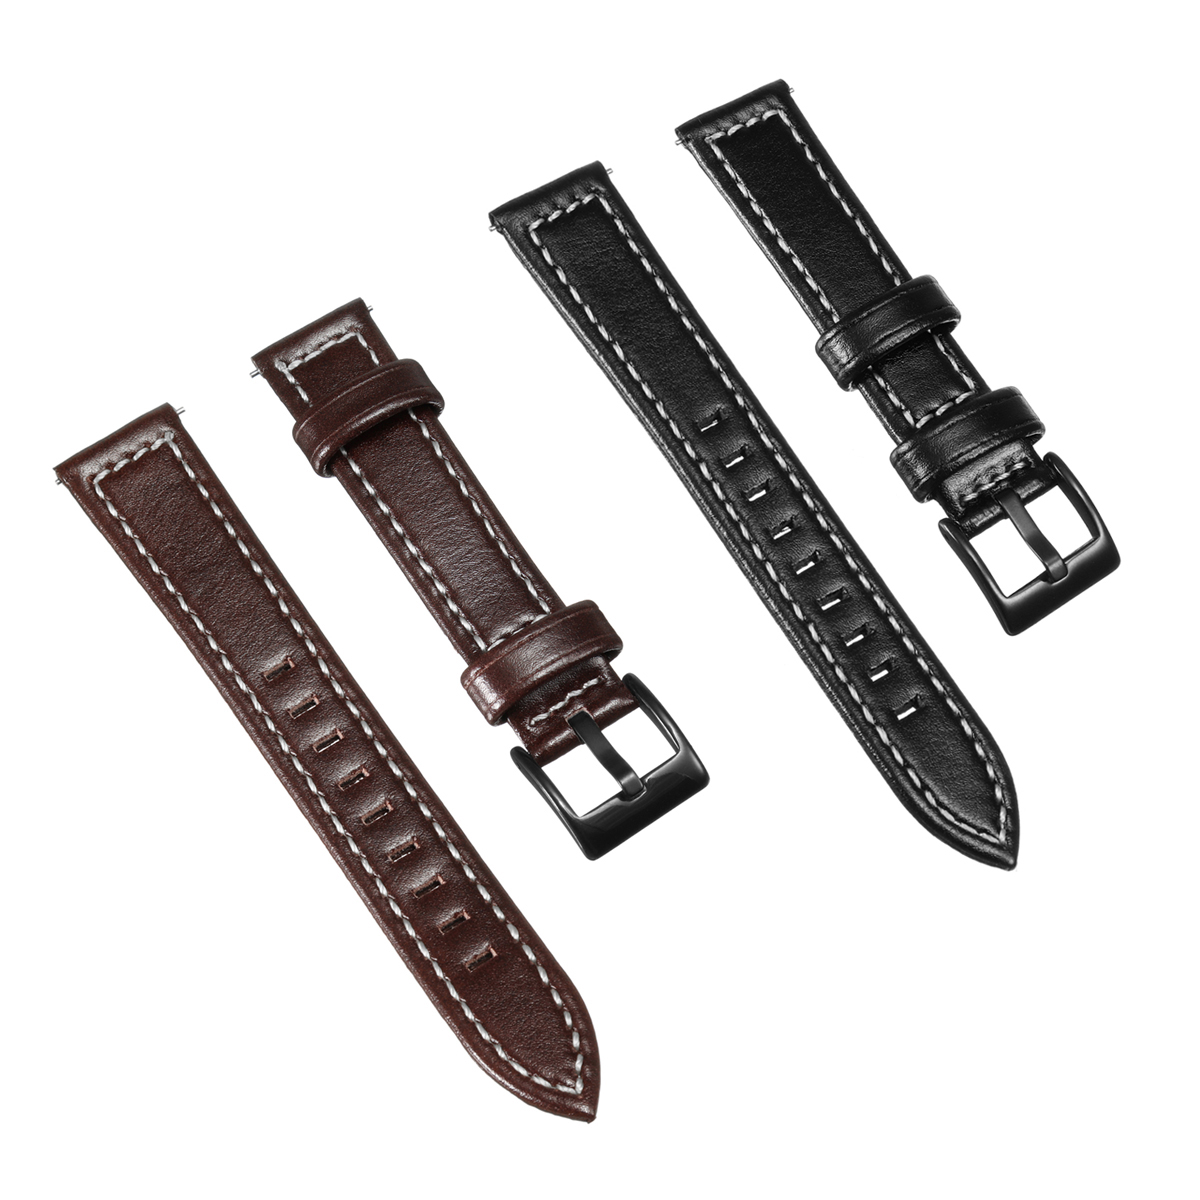 

Replacement 18mm Leather Wrist Watch Band Strap For Nokia Steel HR